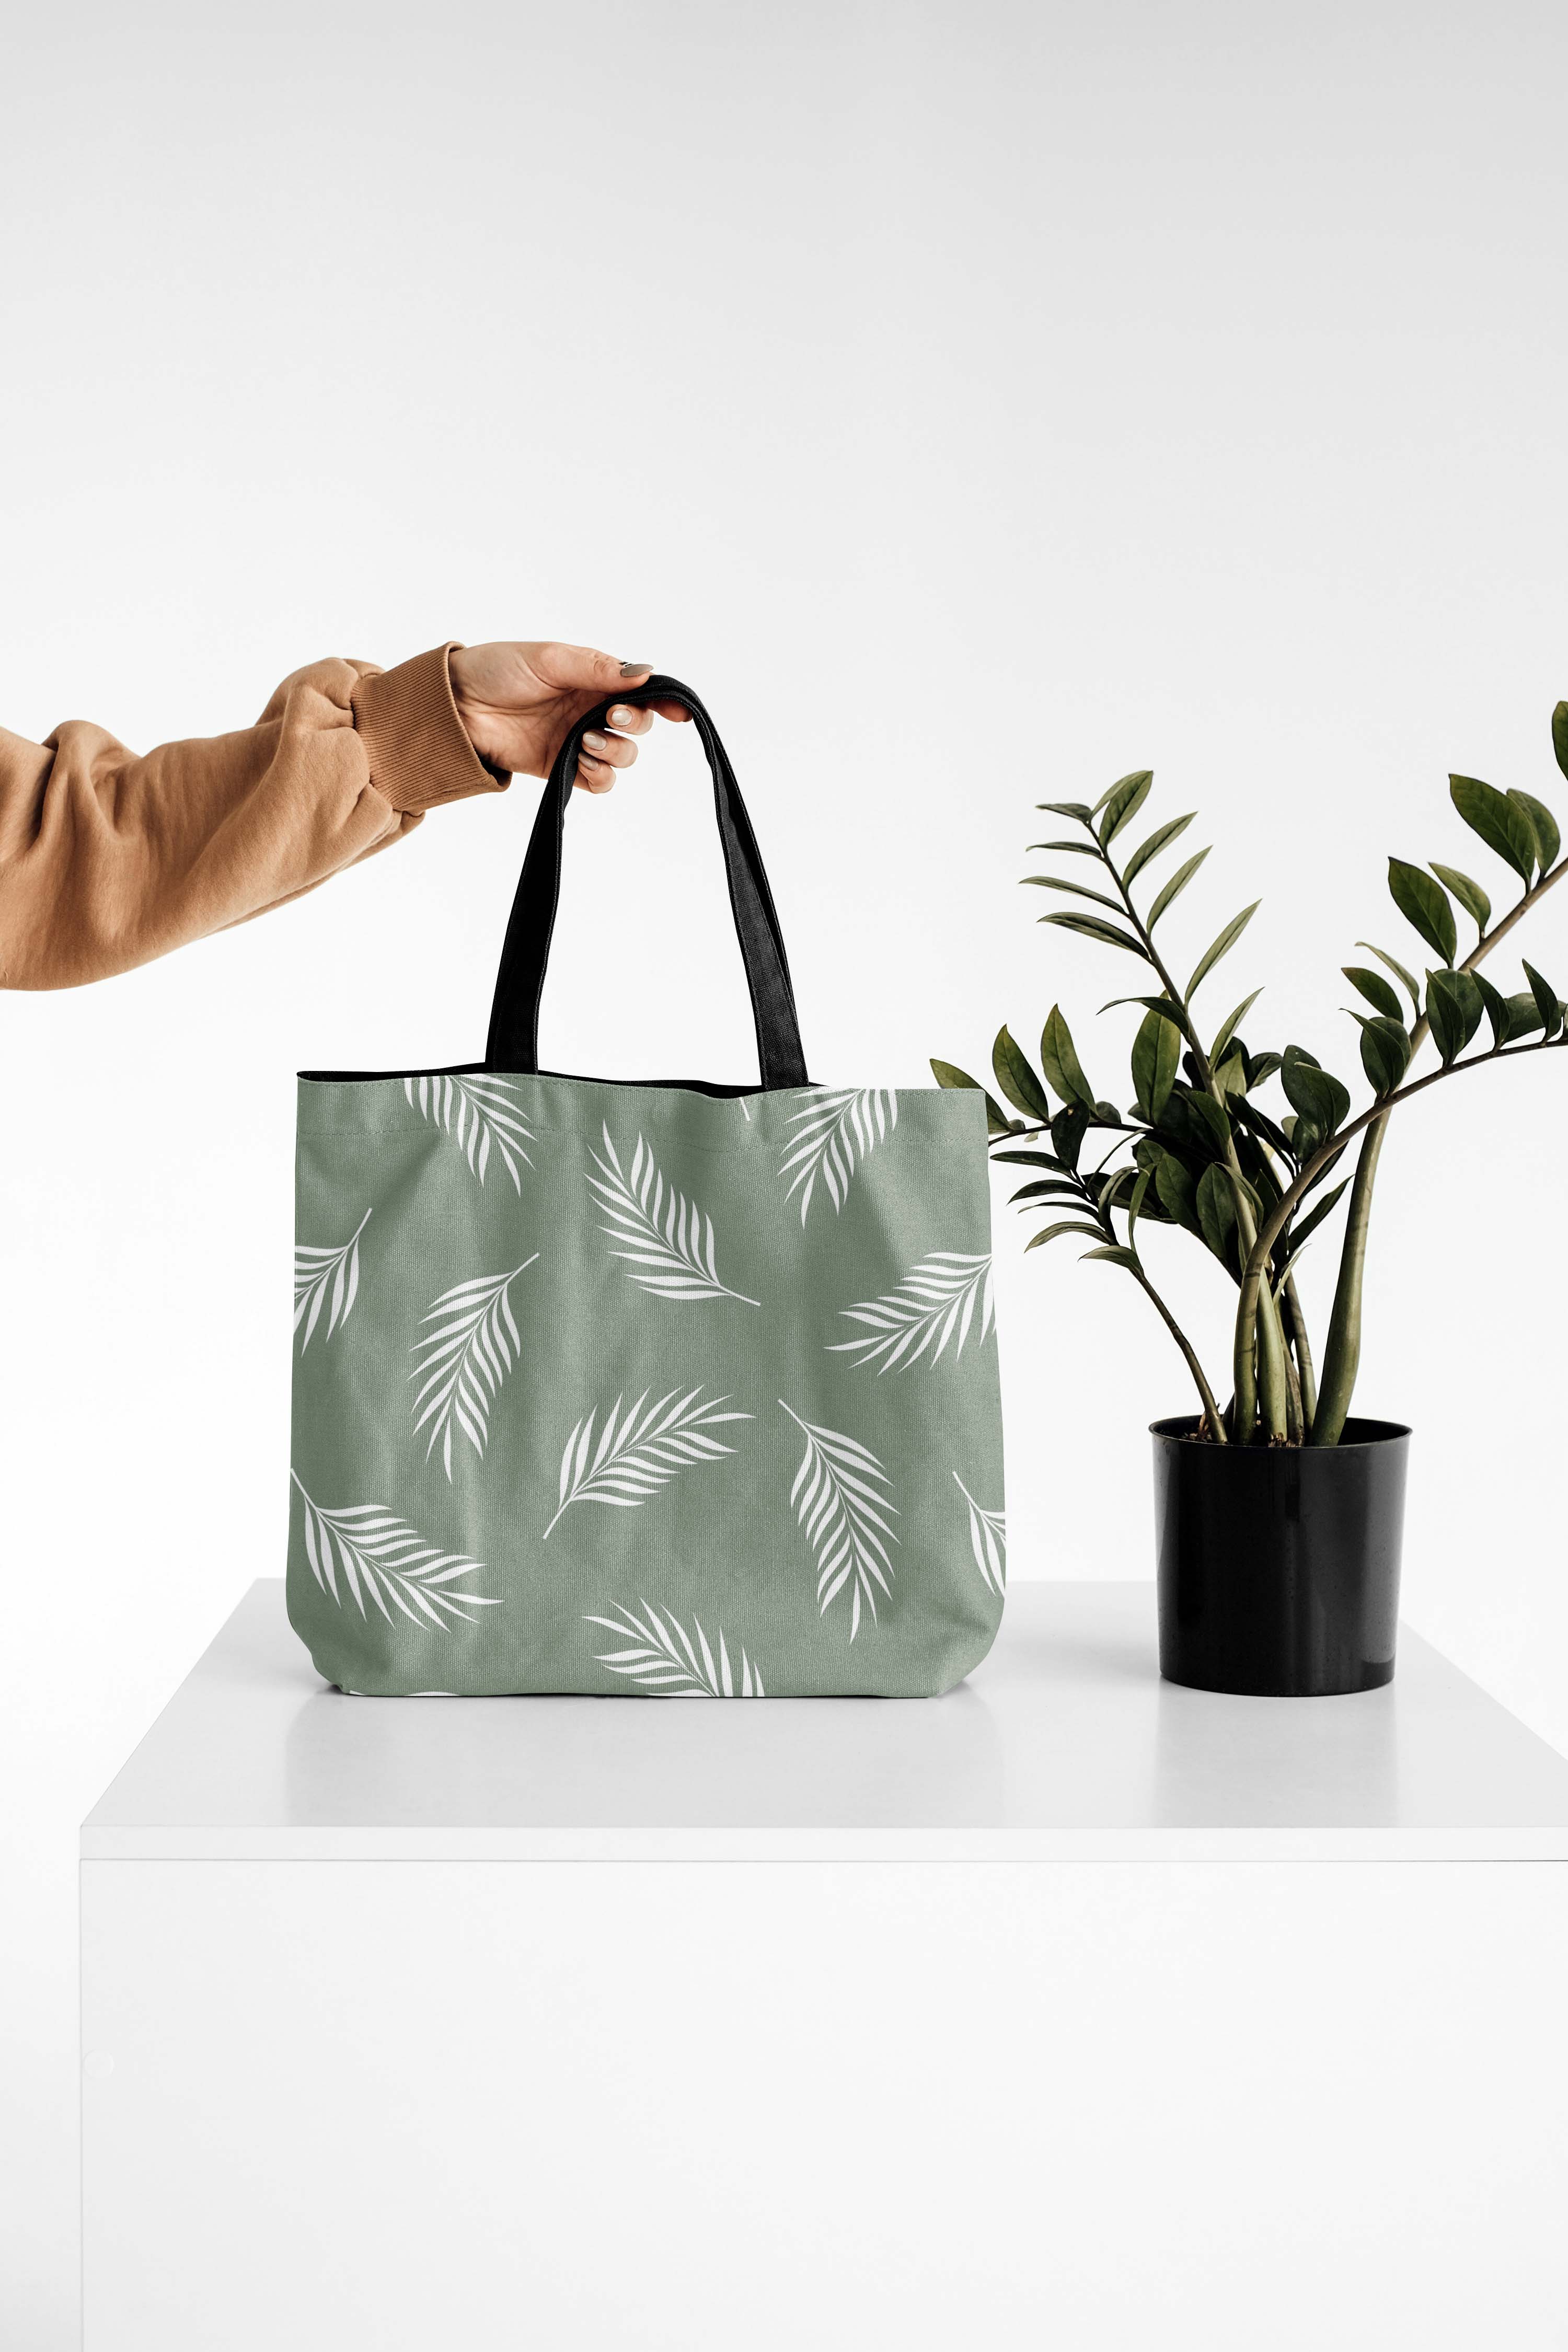 Person holding a green bag next to a plant.